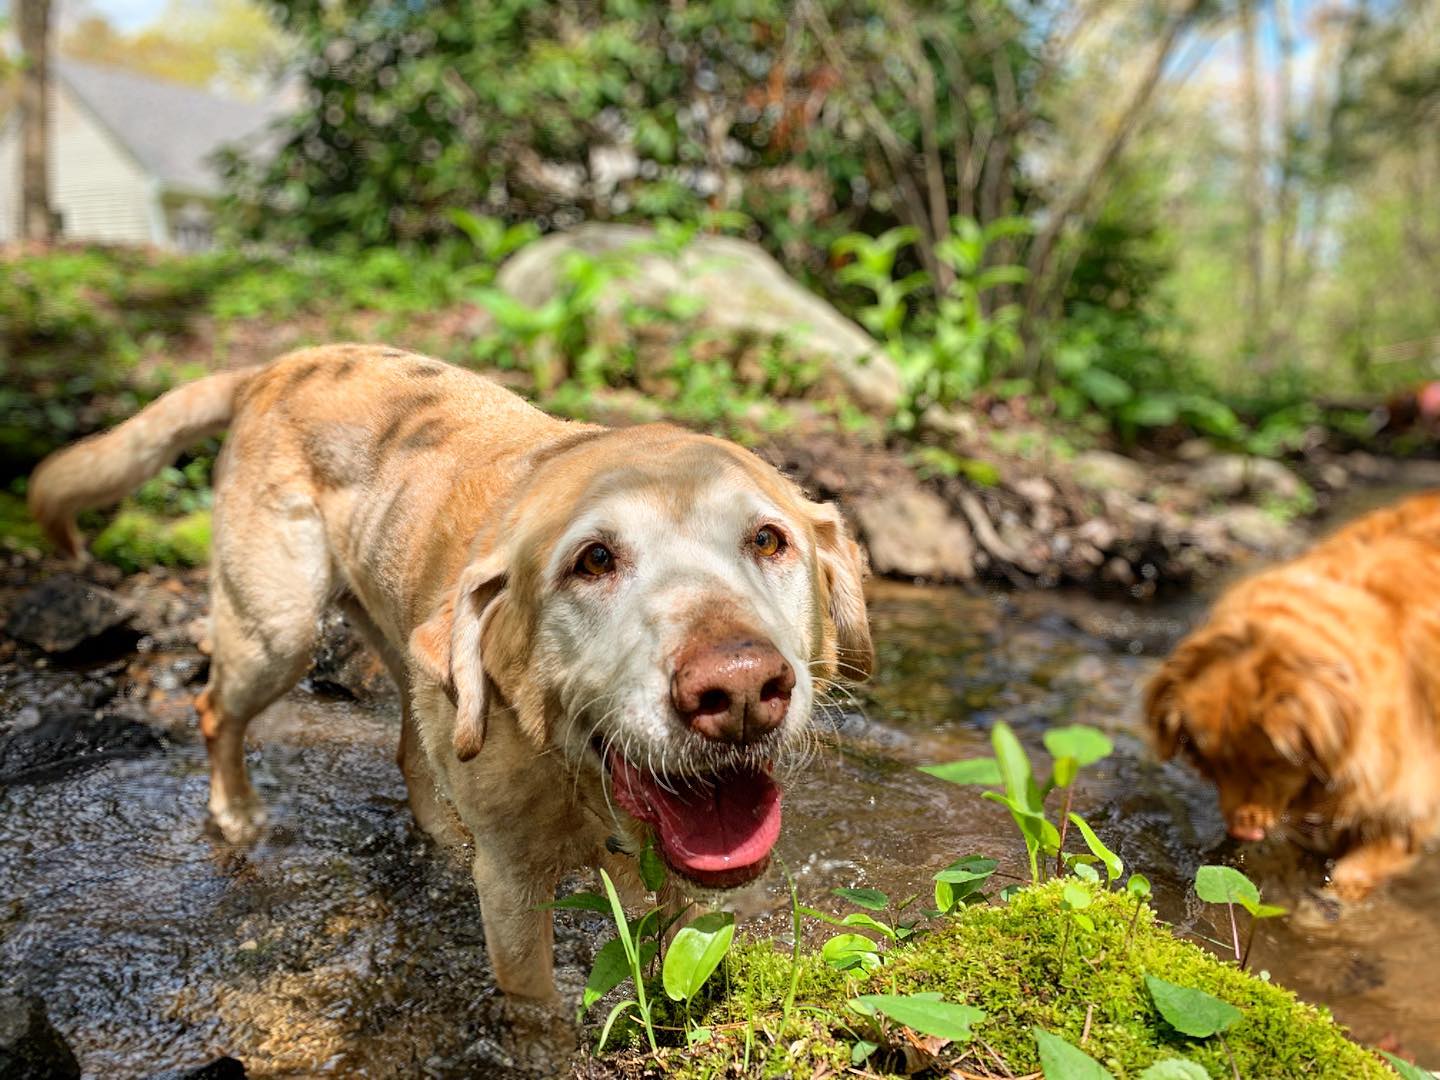 Dog hiking adventures and training in Canton, MA and surrounding areas. Find out why our dog hiking beats typical dog walks around the neighborhood!